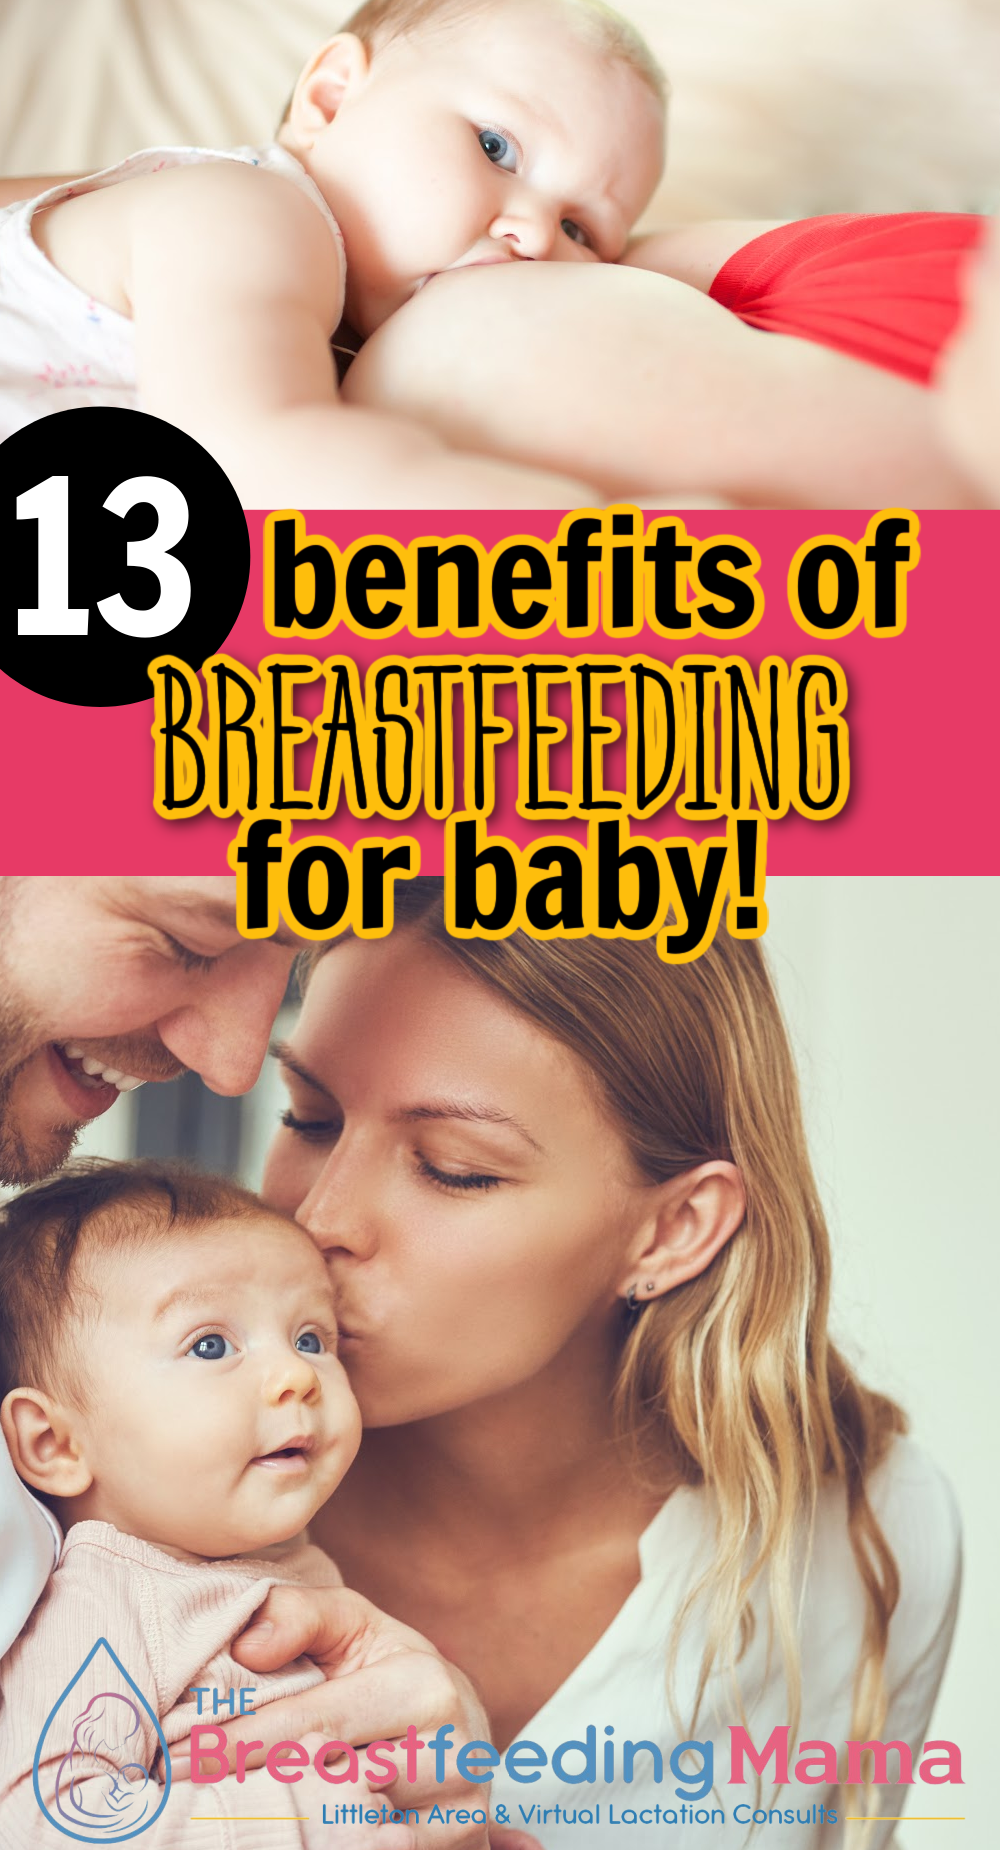 benefits of breastfeeding for baby